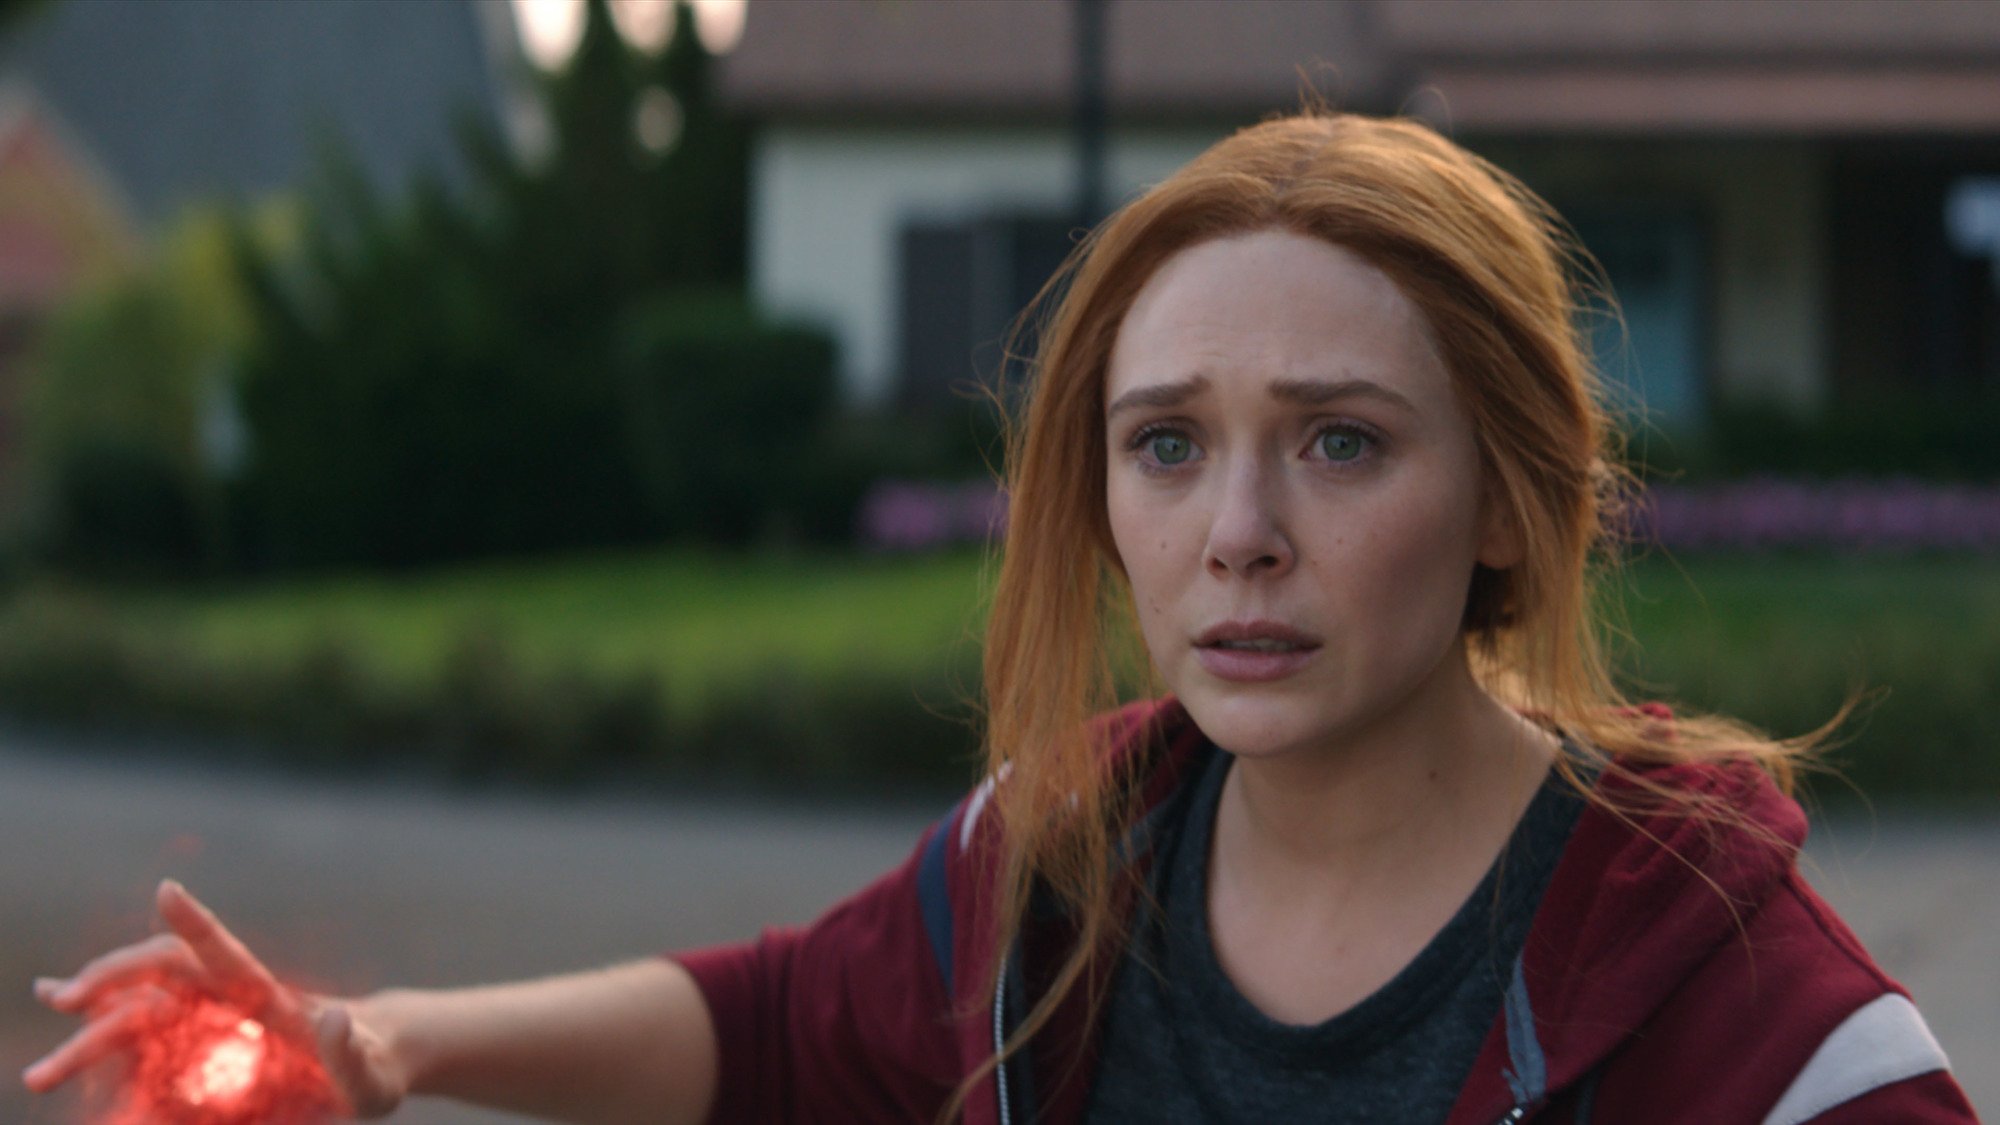 Elizabeth Olsen as Wanda Maximoff in 'WandaVision.' She's wearing a sweatshirt and about to use her powers, but she looks upset about something.